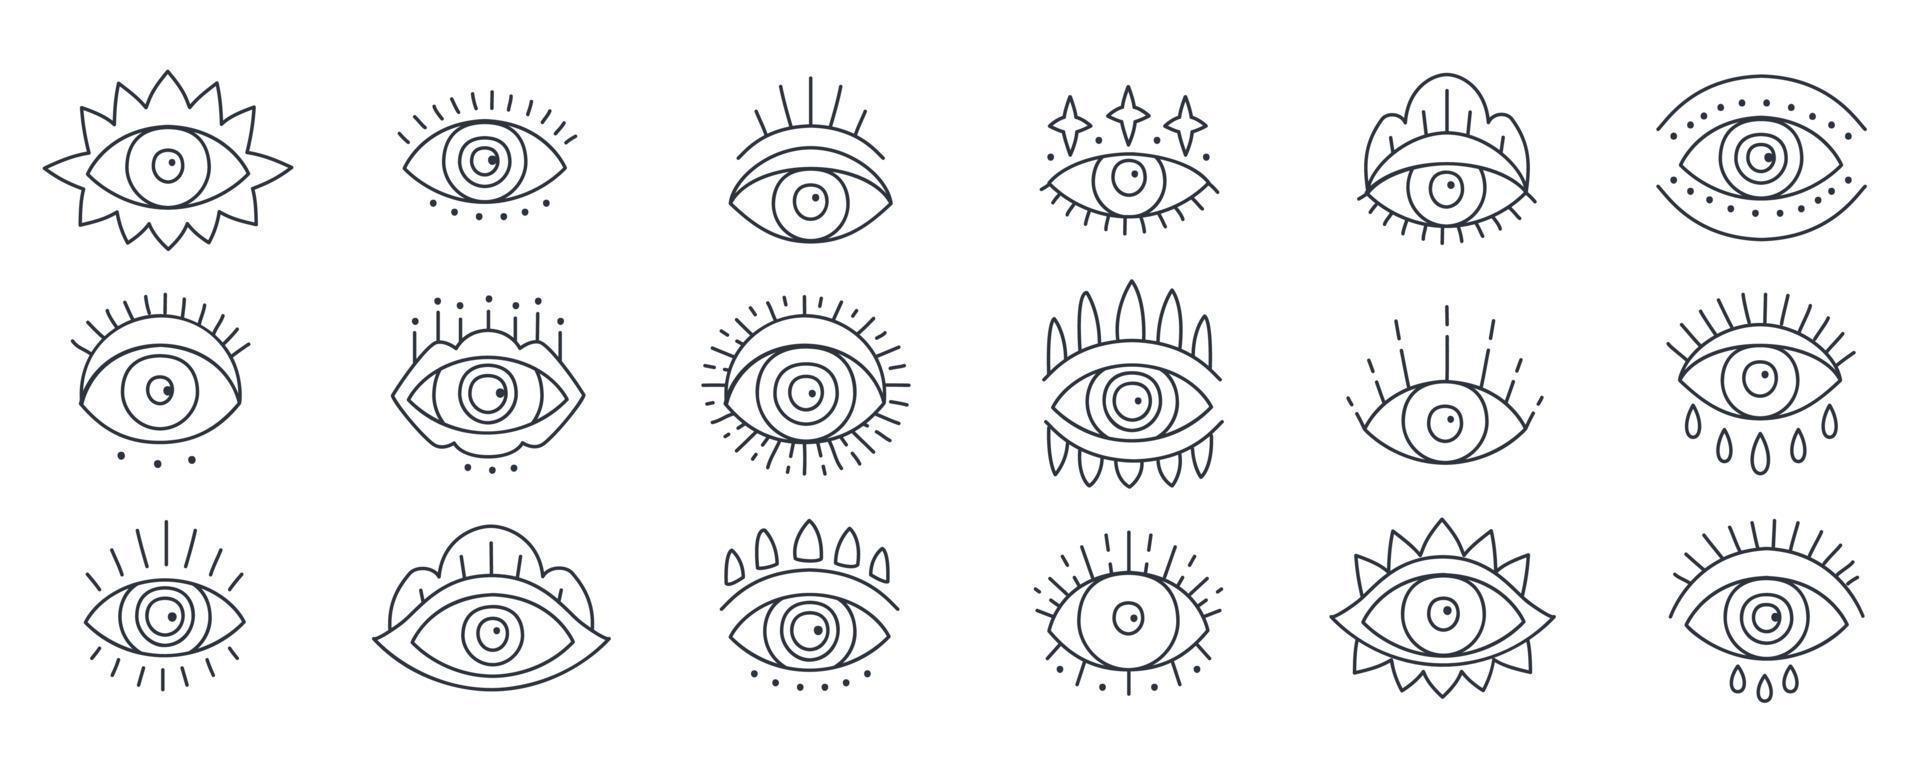 Evil magical doodle eye set in a trending minimal linear style vector